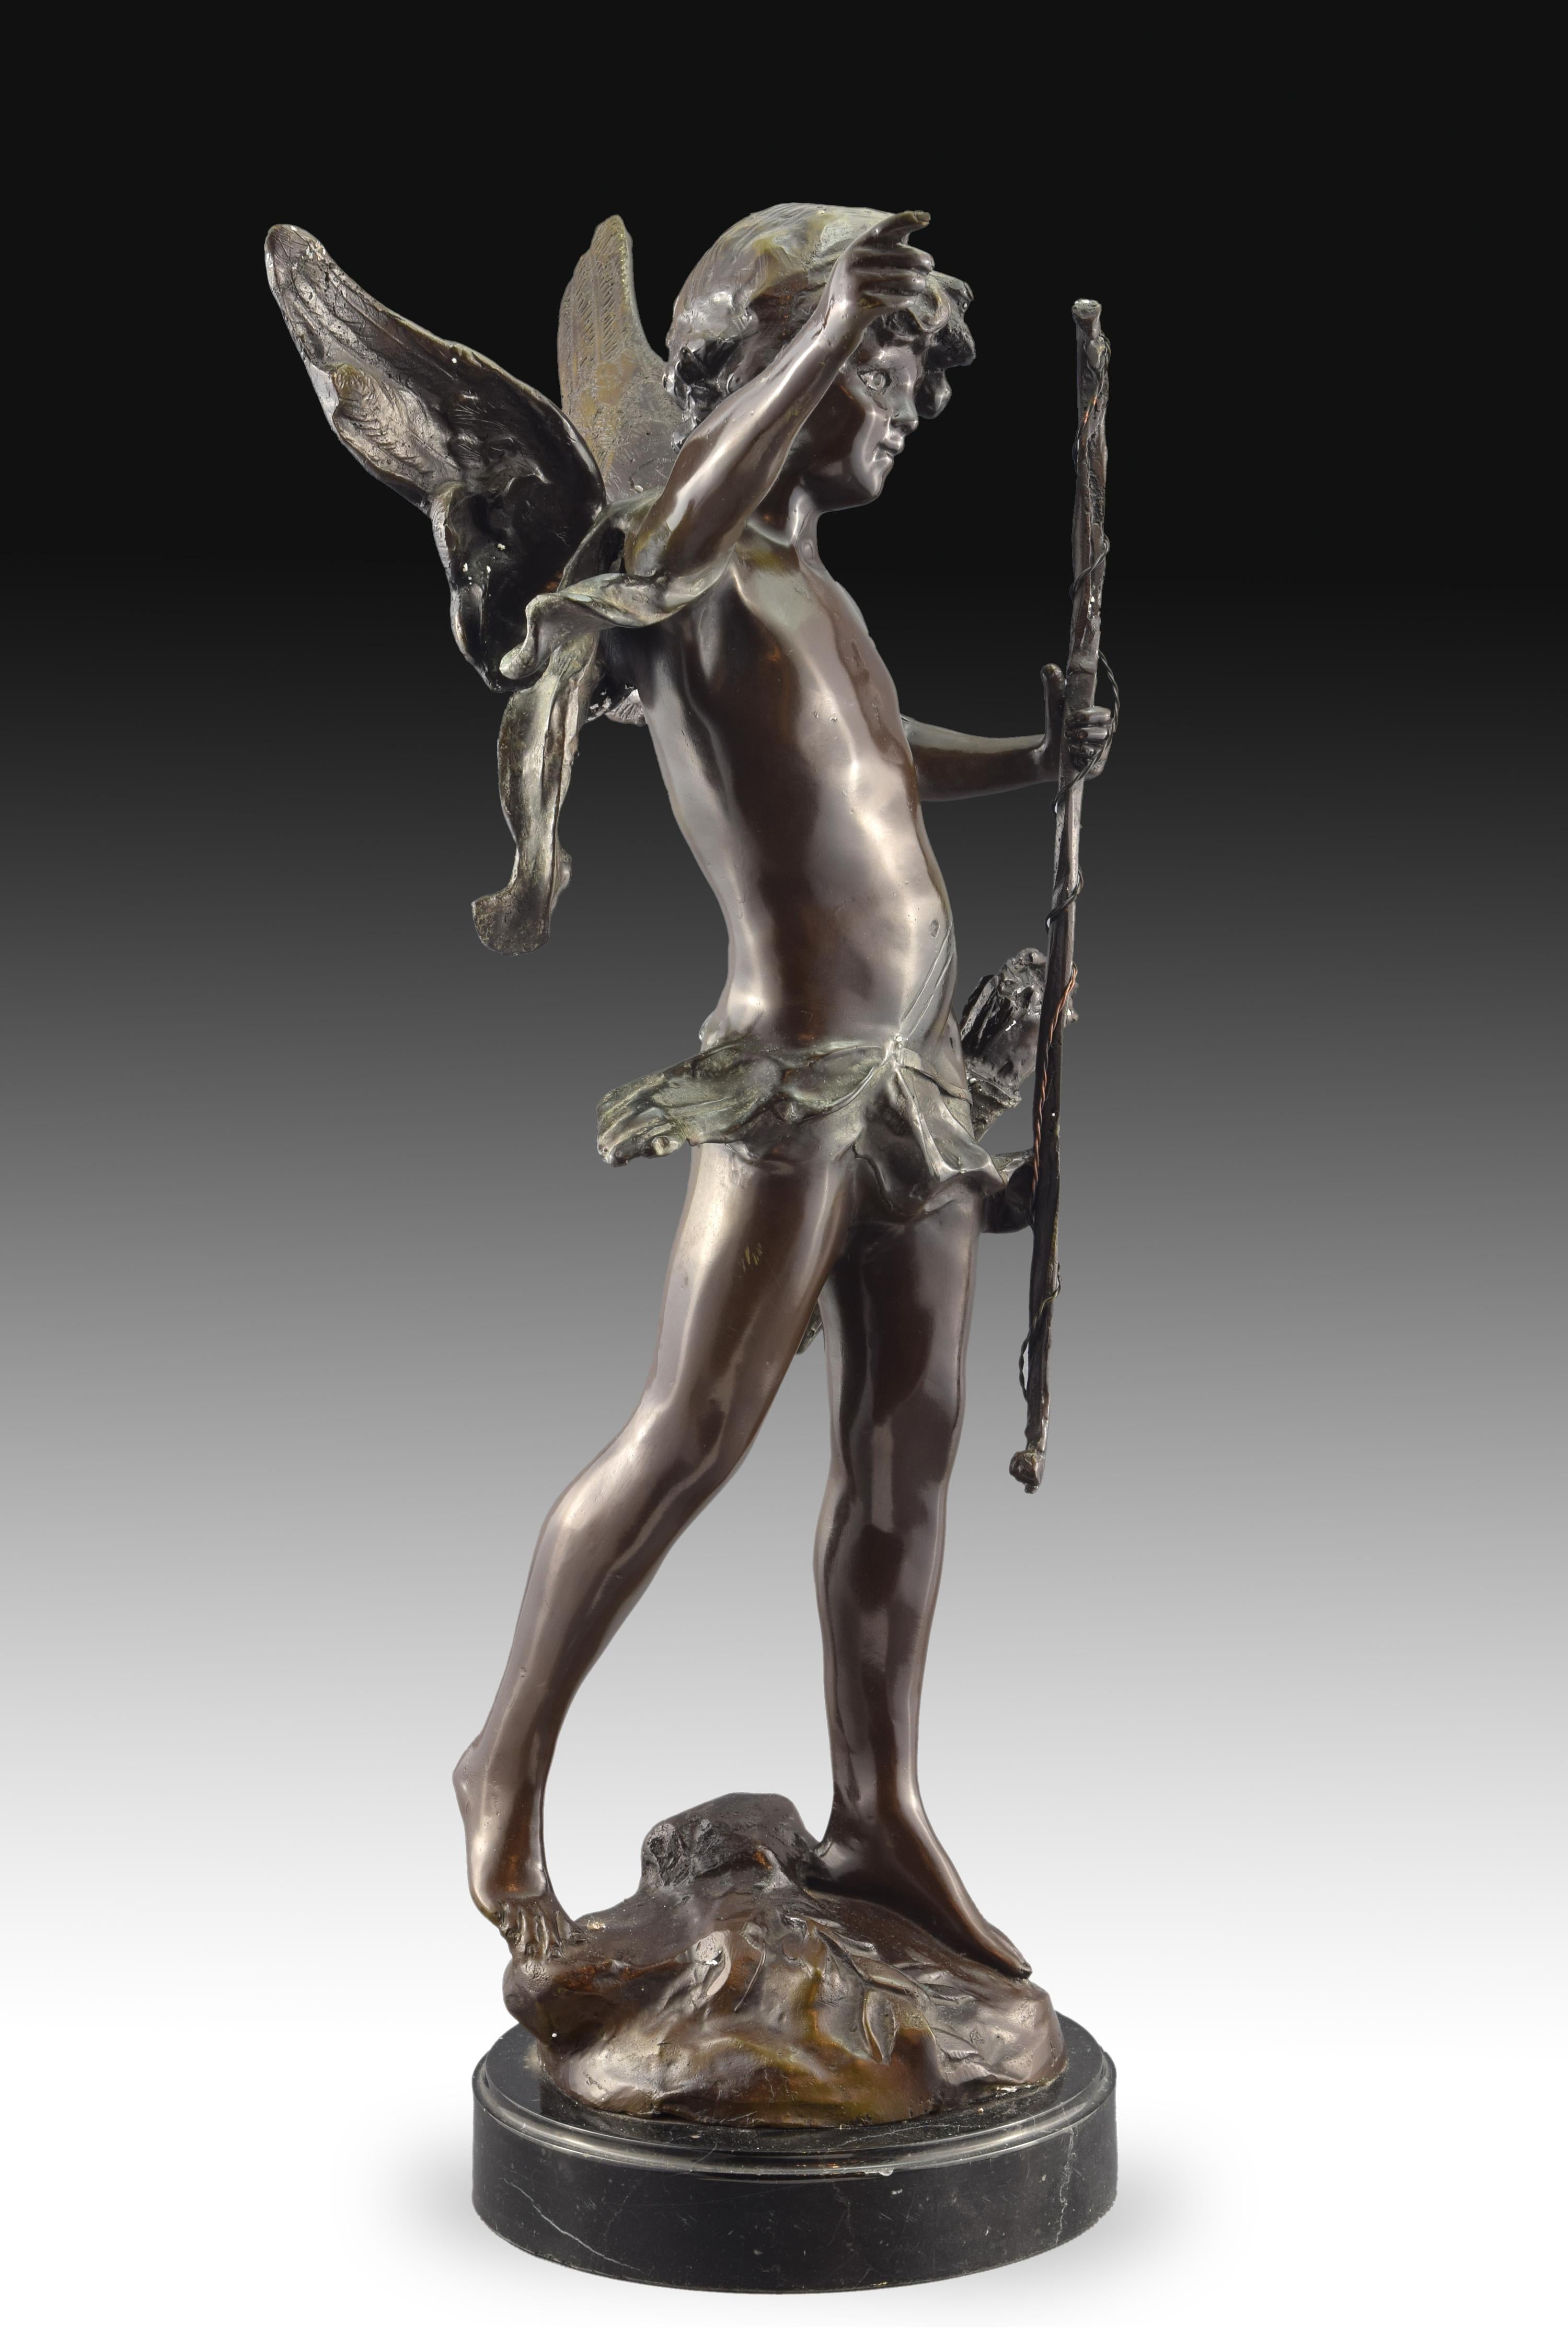 On a round base stands the figure of the God of Love, Cupid. The sculpture in bronze, with the iconographic attributes corresponding to this figure in classical mythology, was made based on models by August Moreau (1834-1917). This French sculptor